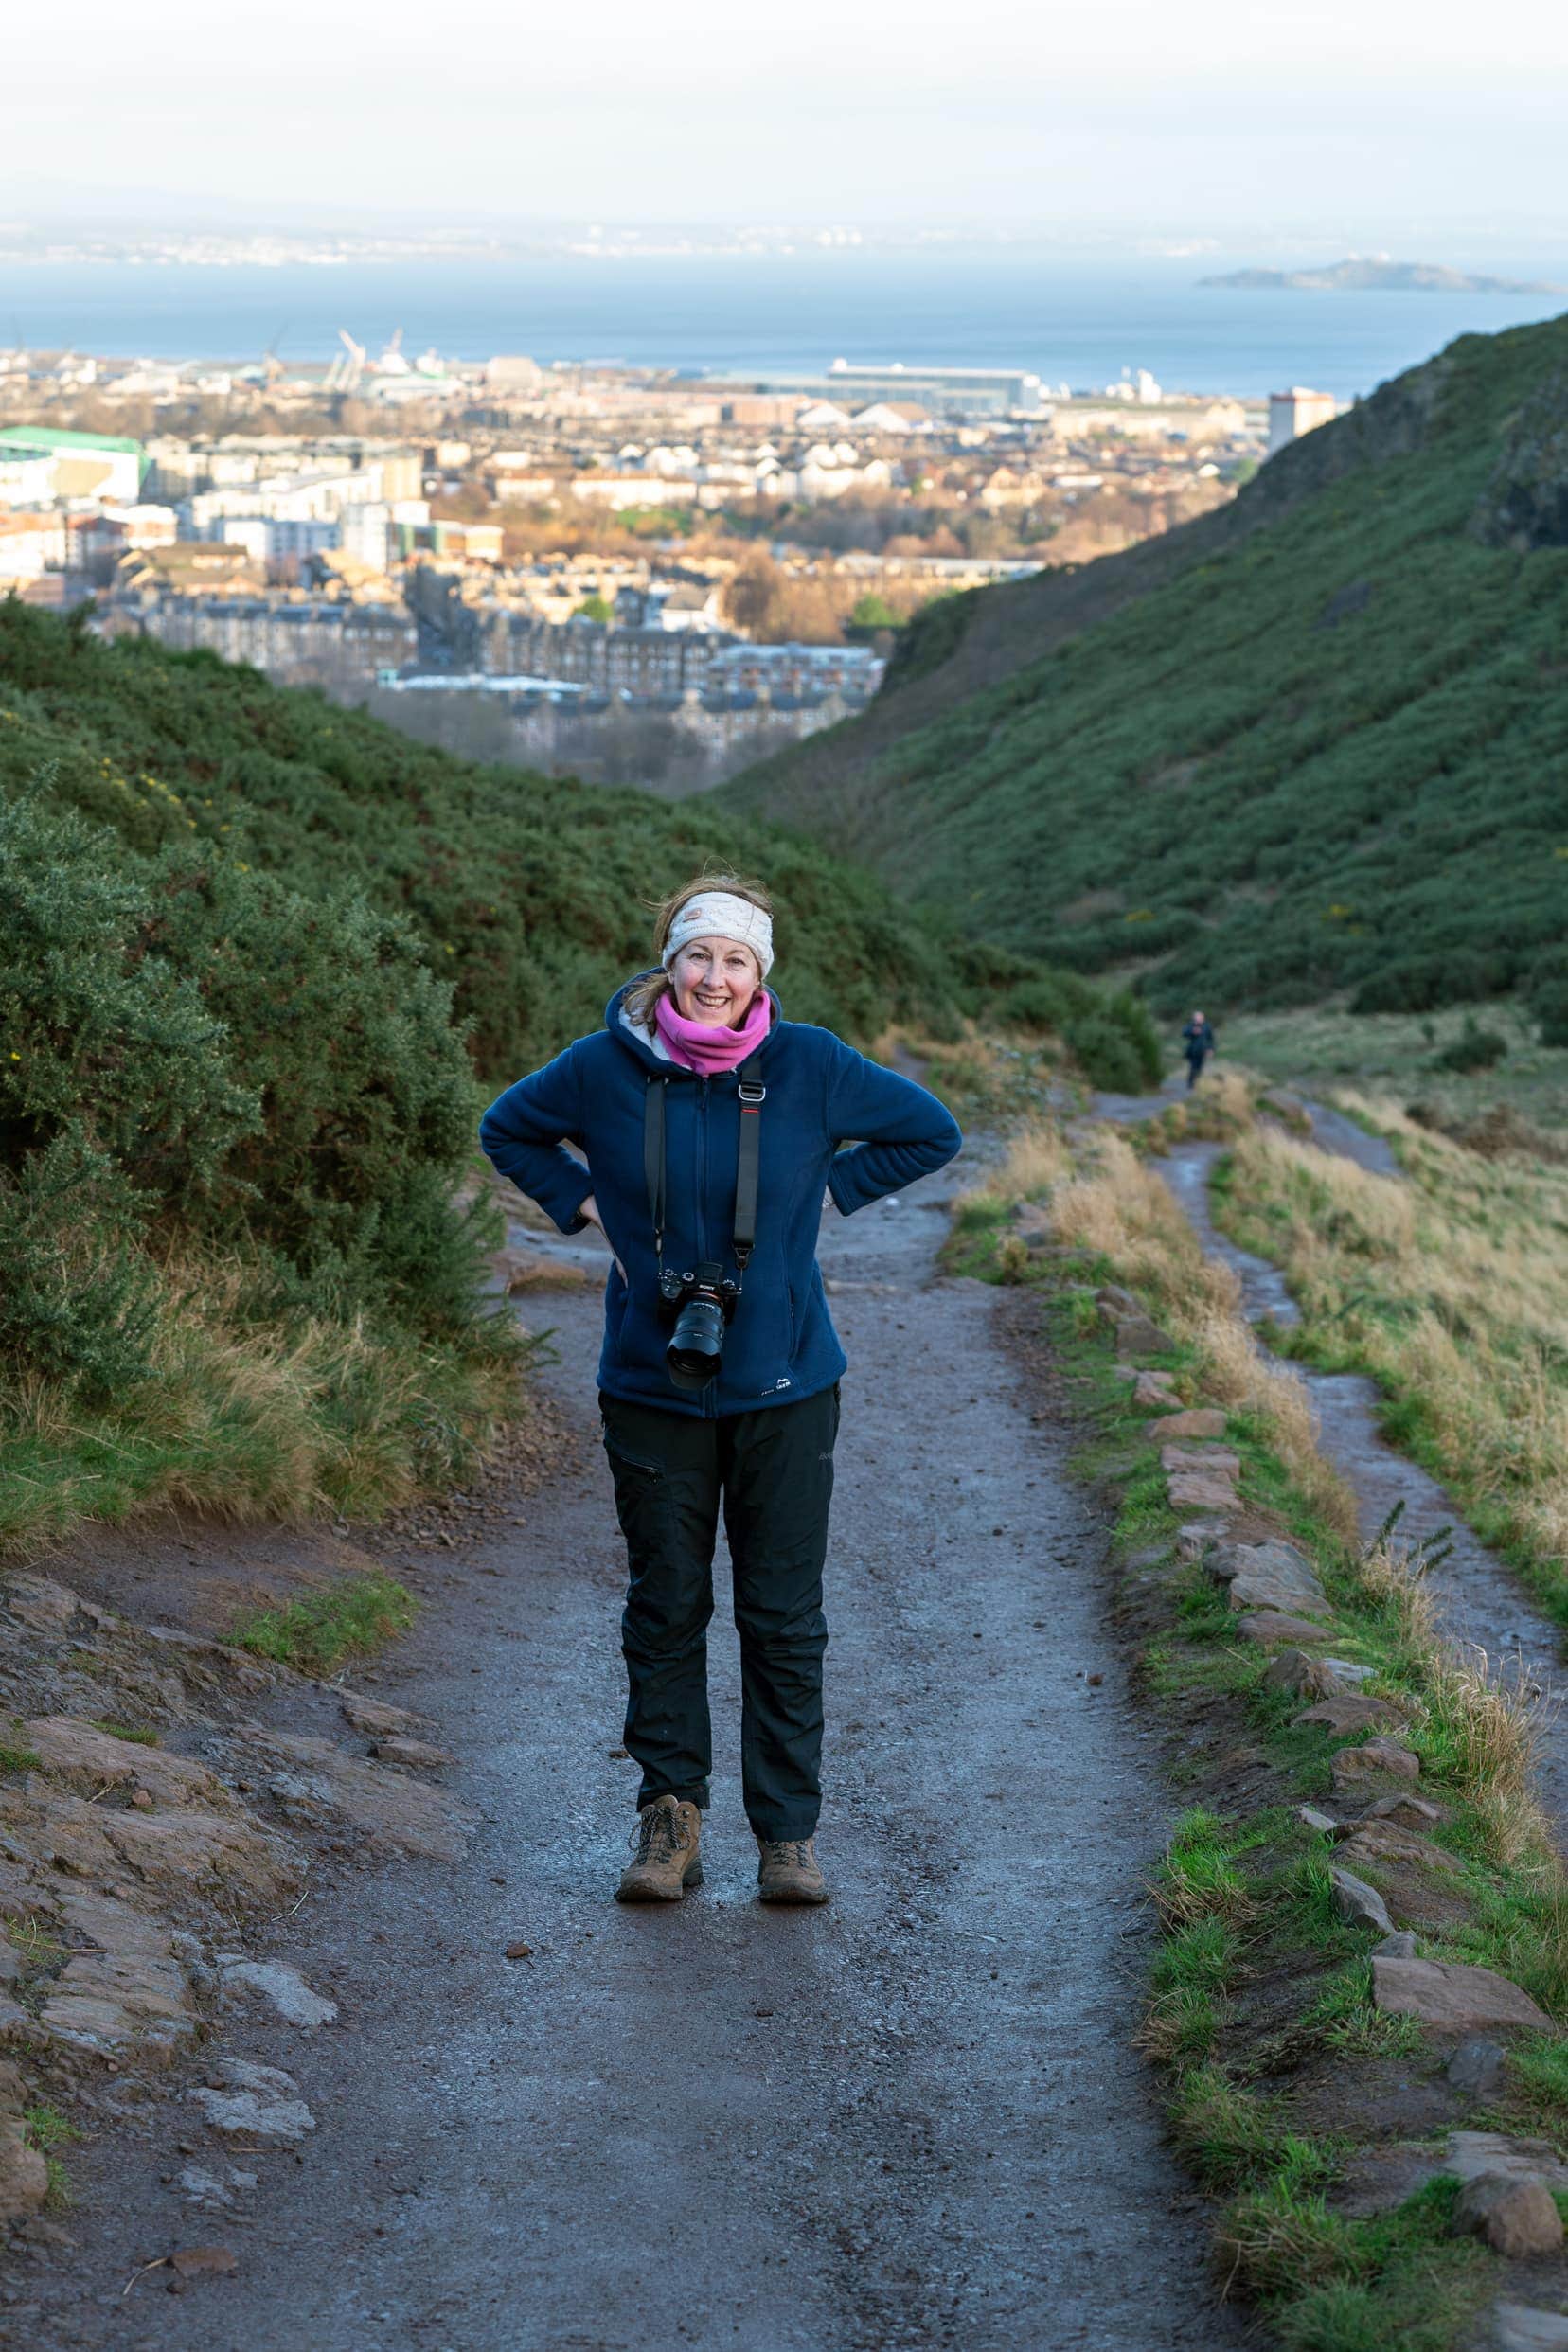 Shelley stood on path with Edinburgh in background